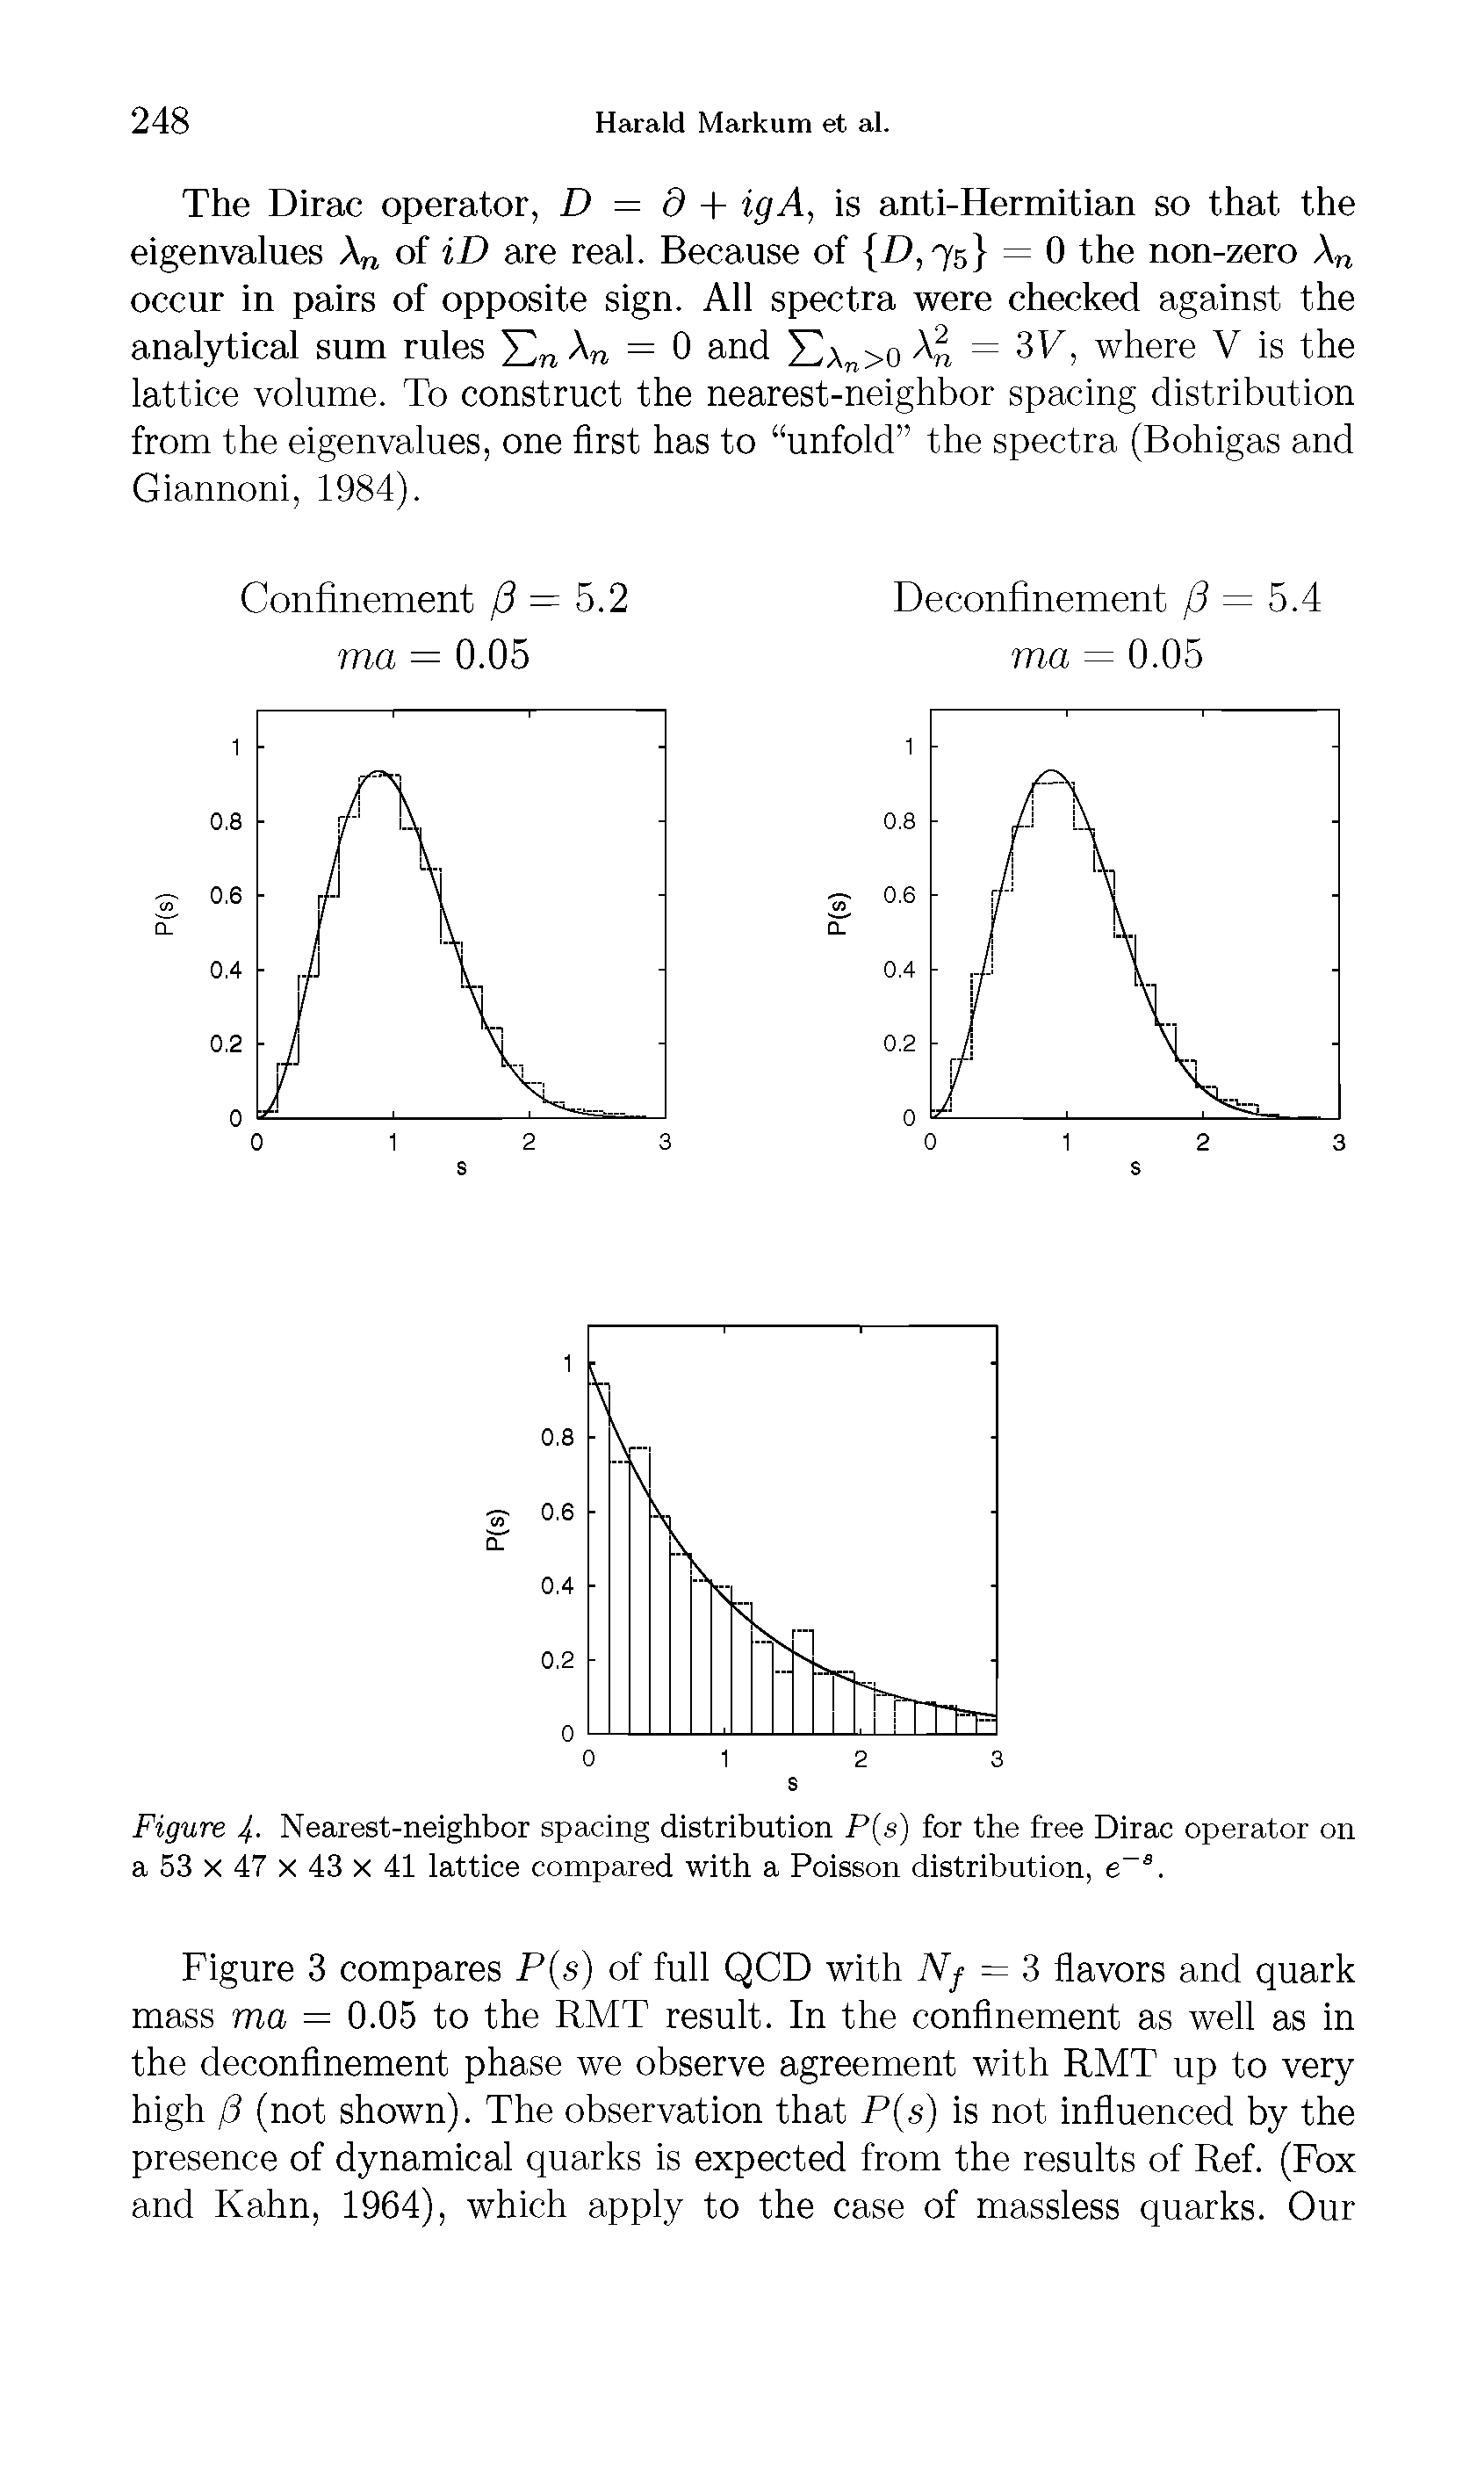 Figure 4 Nearest-neighbor spacing distribution P(s) for the free Dirac operator on a 53 x 47 x 43 x 41 lattice compared with a Poisson distribution, e-s.